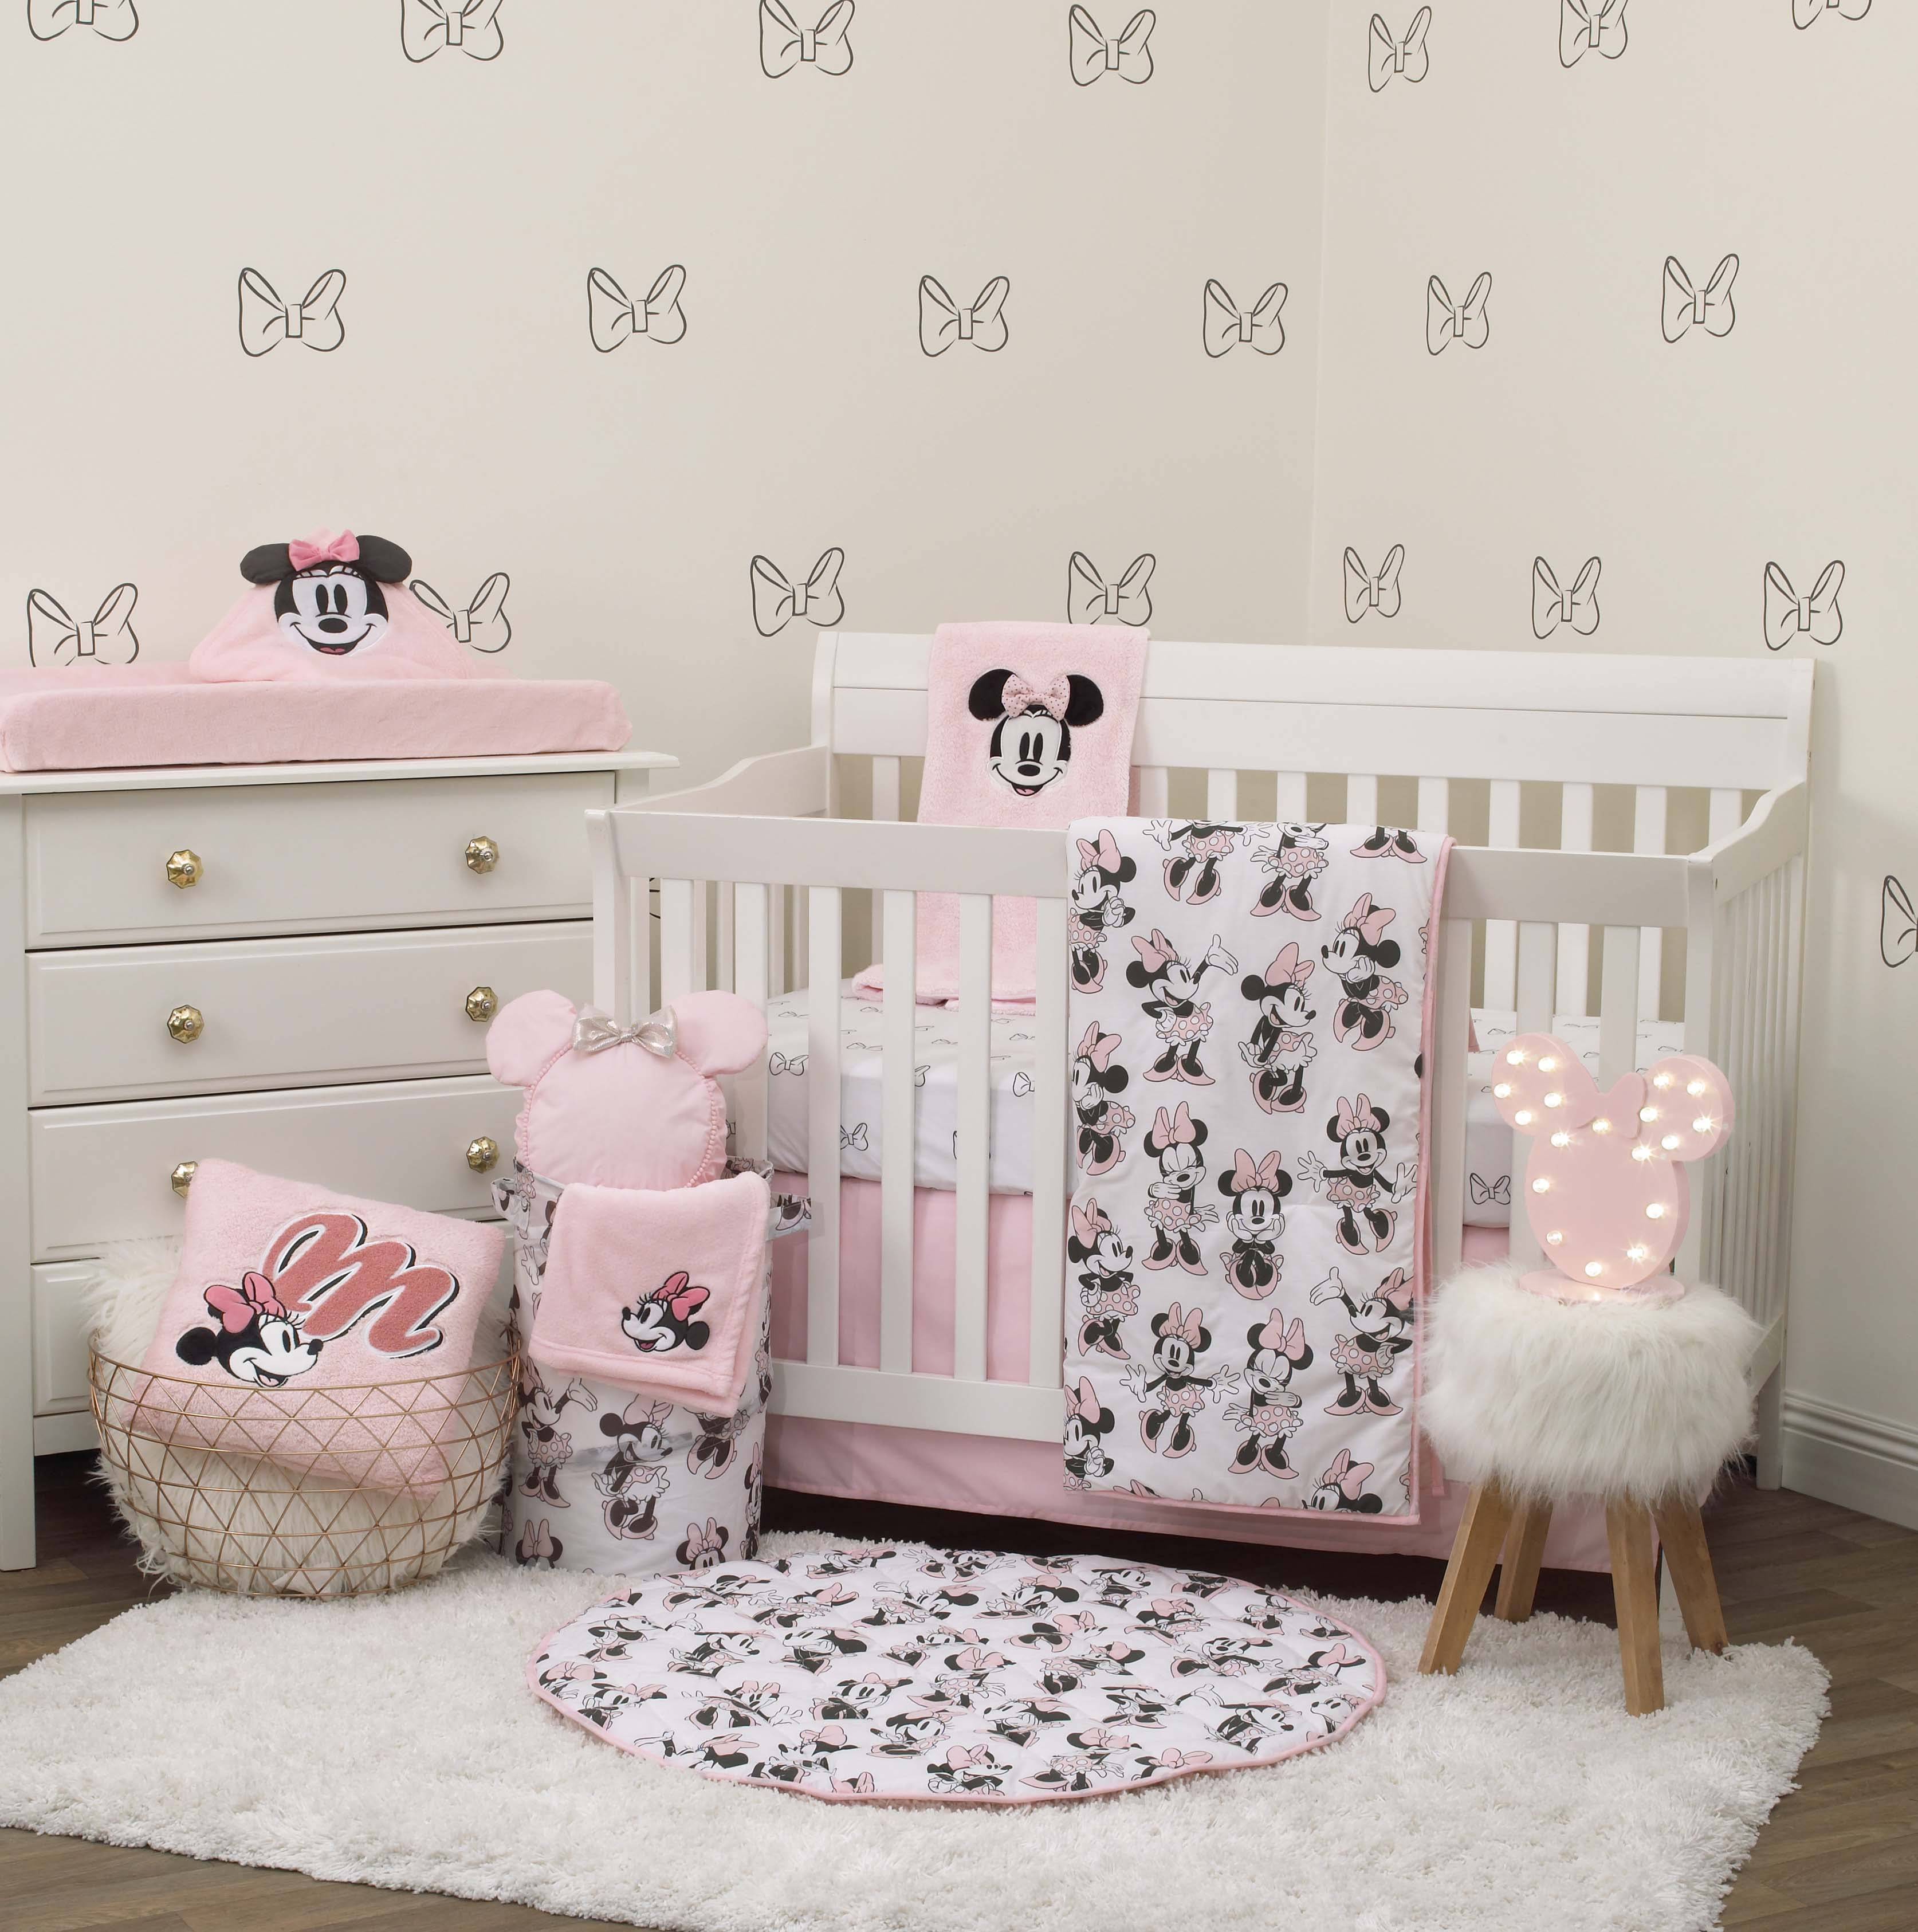 MINNIE NURSERY BABY BEDDING SET-BUMPER-PILLOW-QUILT COVERS fit Cot/COT Bed 